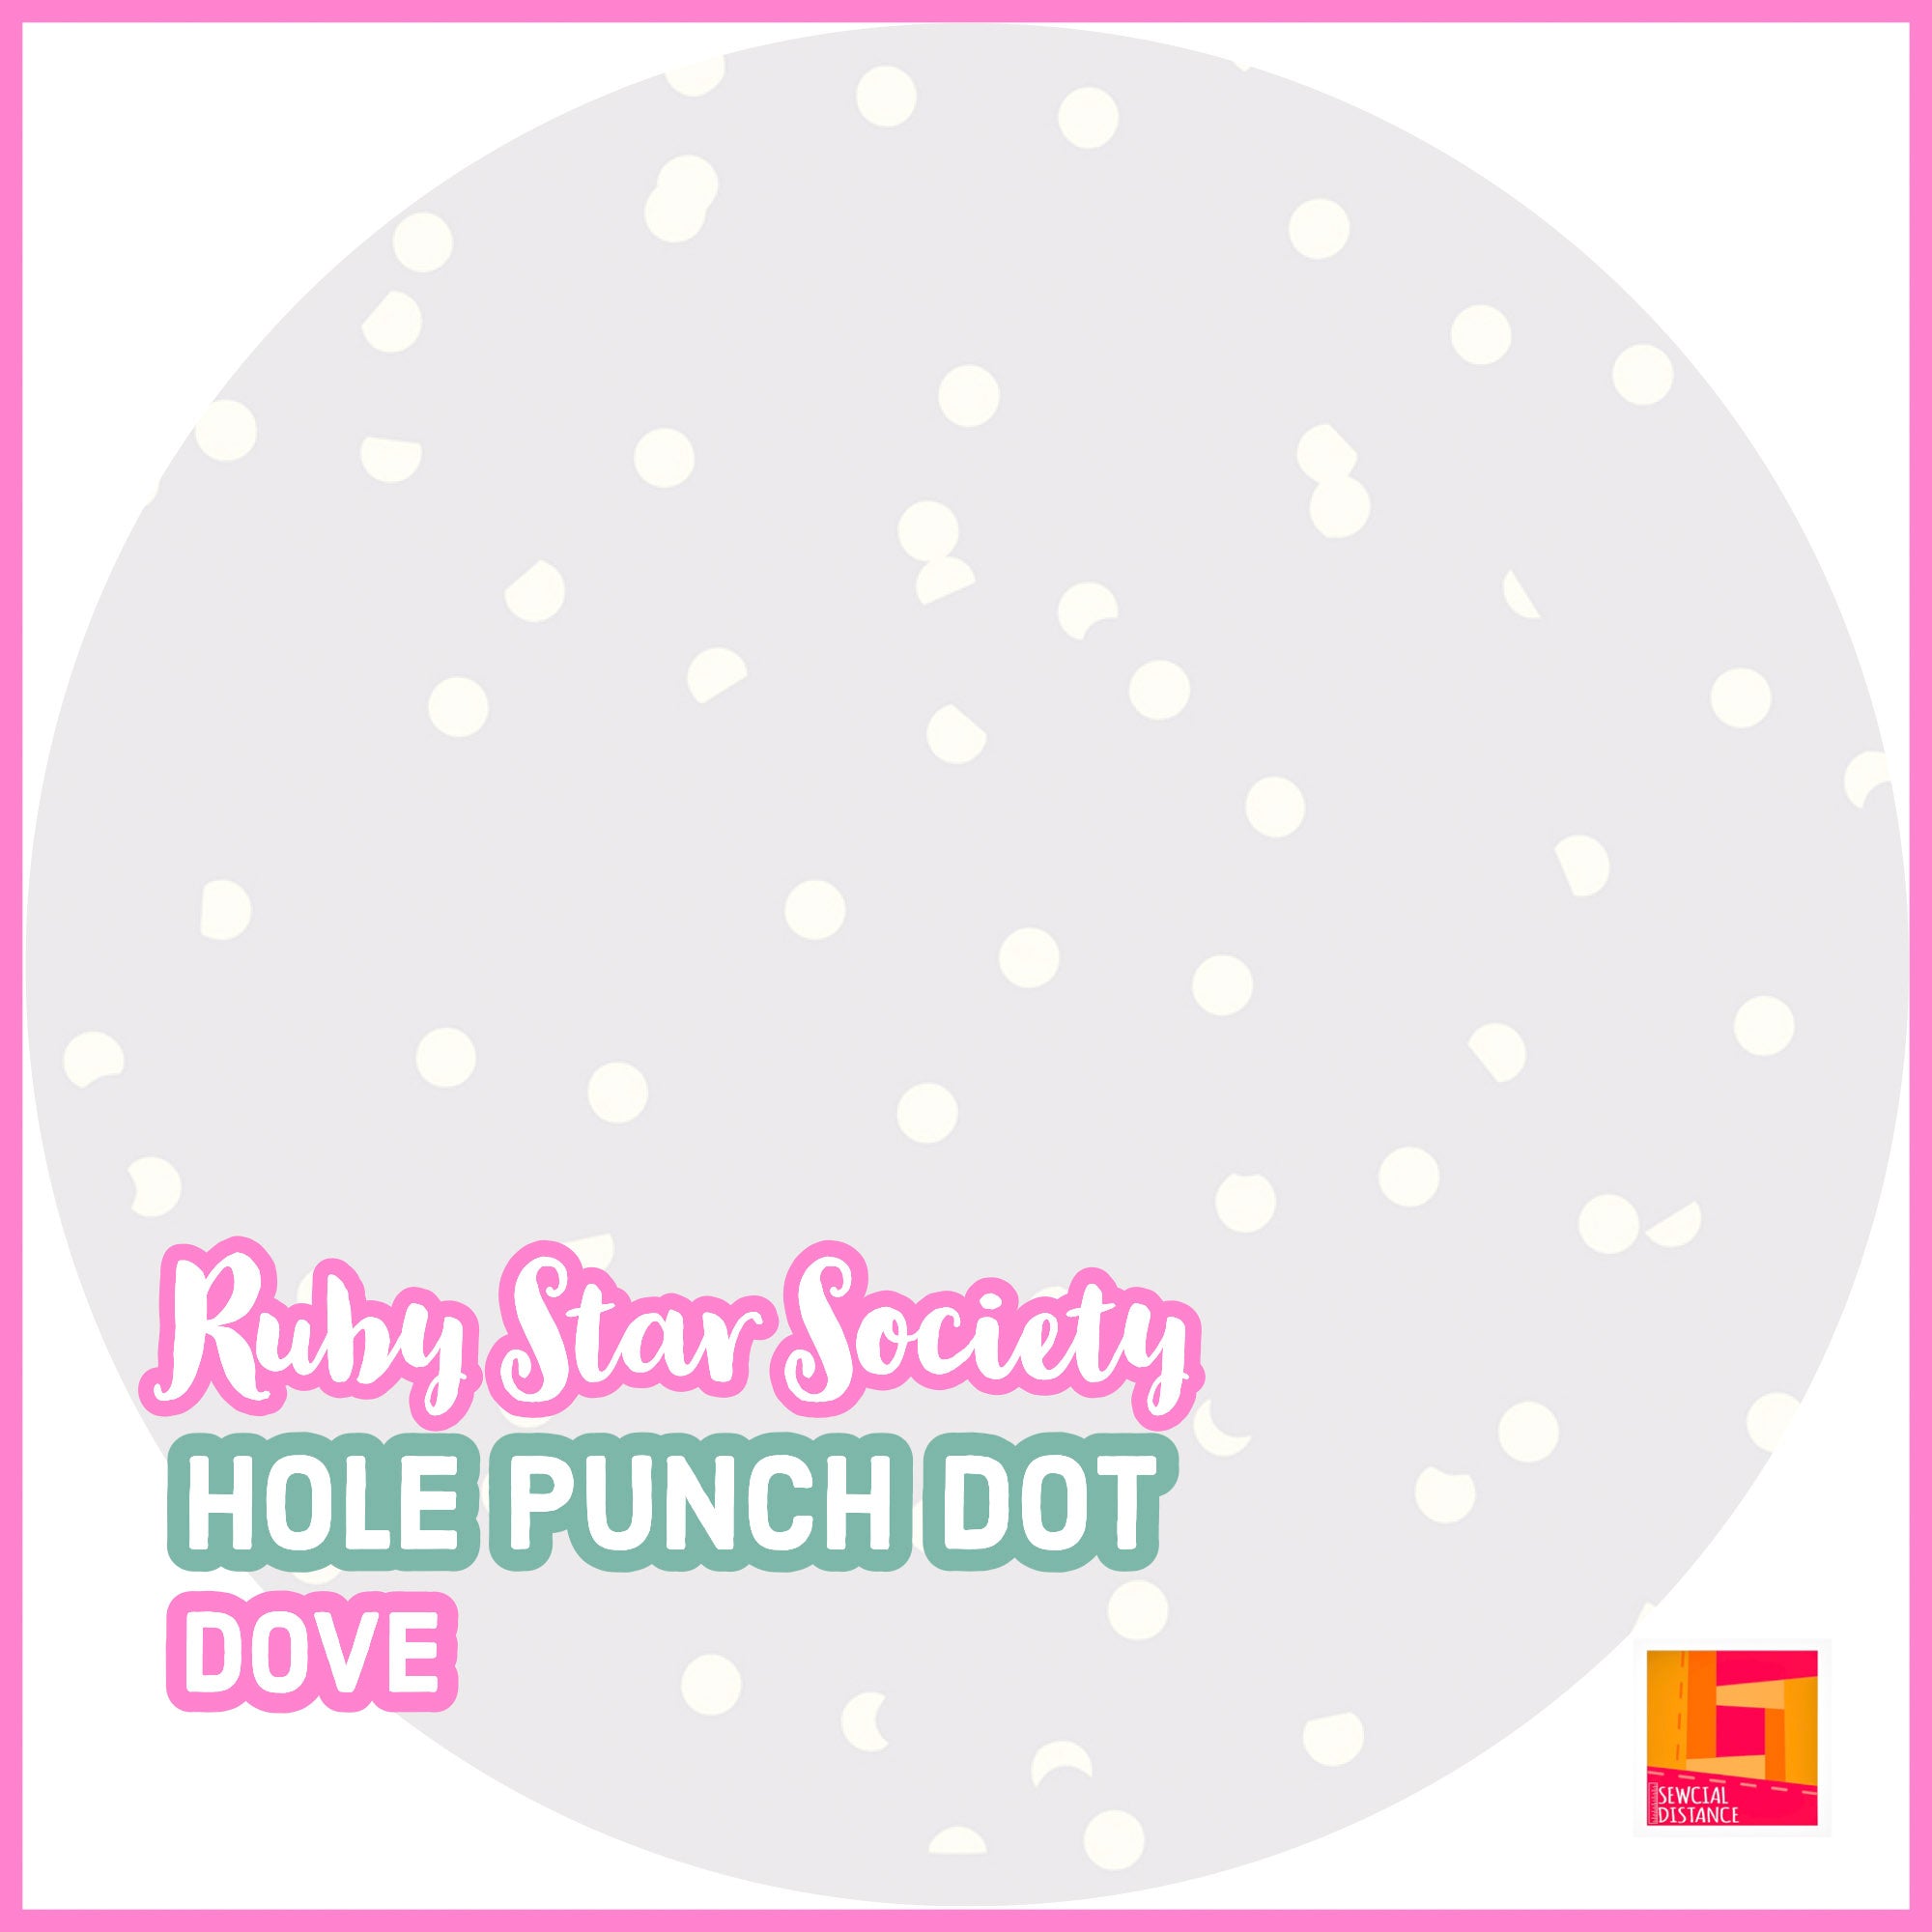 Hole Punch Dot from Ruby Star Society